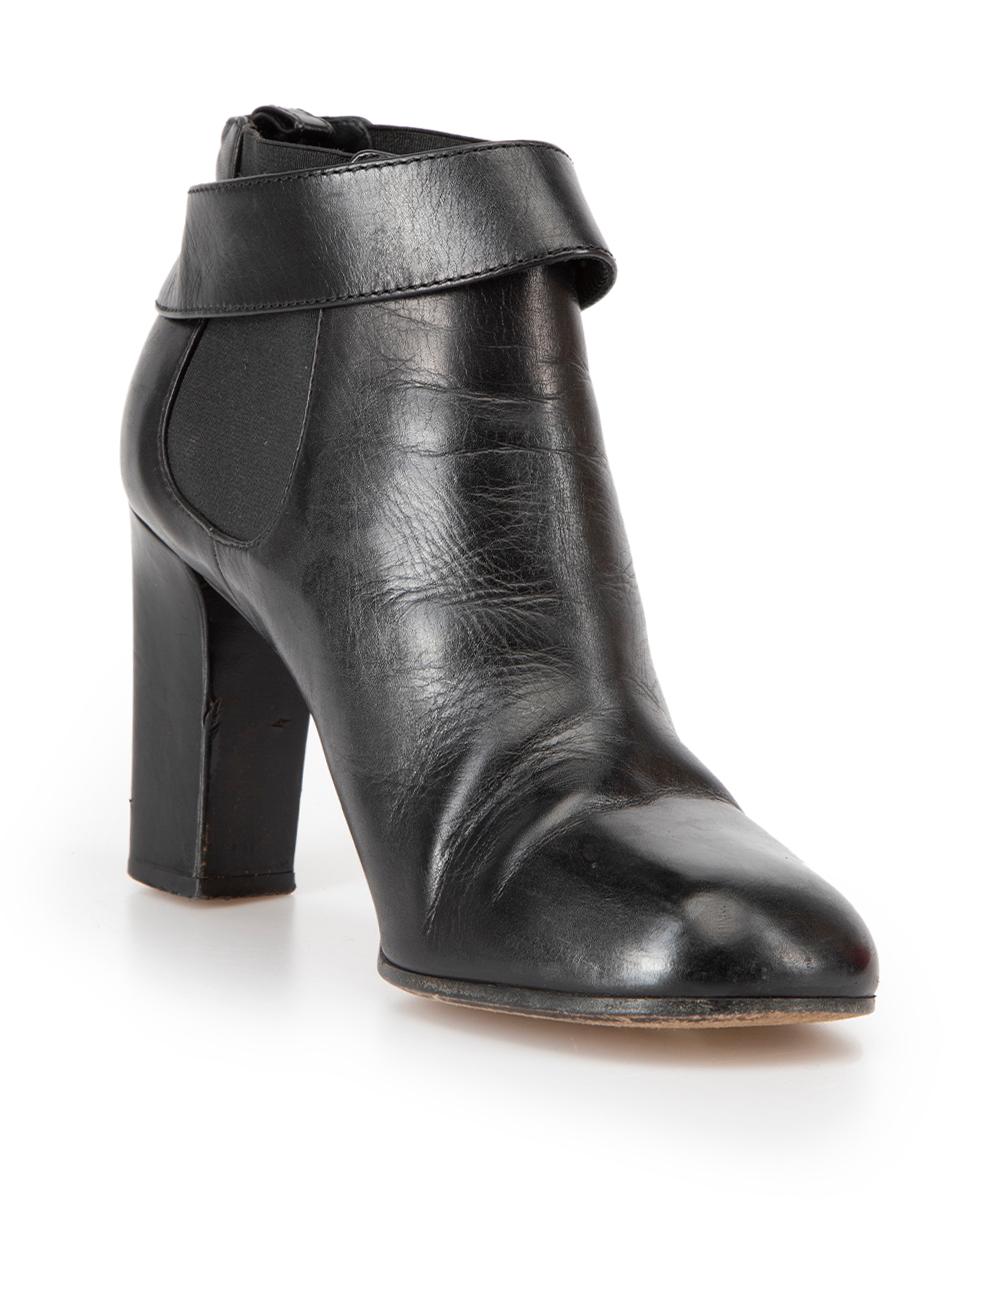 CONDITION is Very good. Minimal wear to boots is evident. Minimal wear to sole and creasing of leather at both toes on this used Chanel designer resale item.




Details


Black

Leather

Ankle boots

Round toe

High block heel

Elasticated side

CC